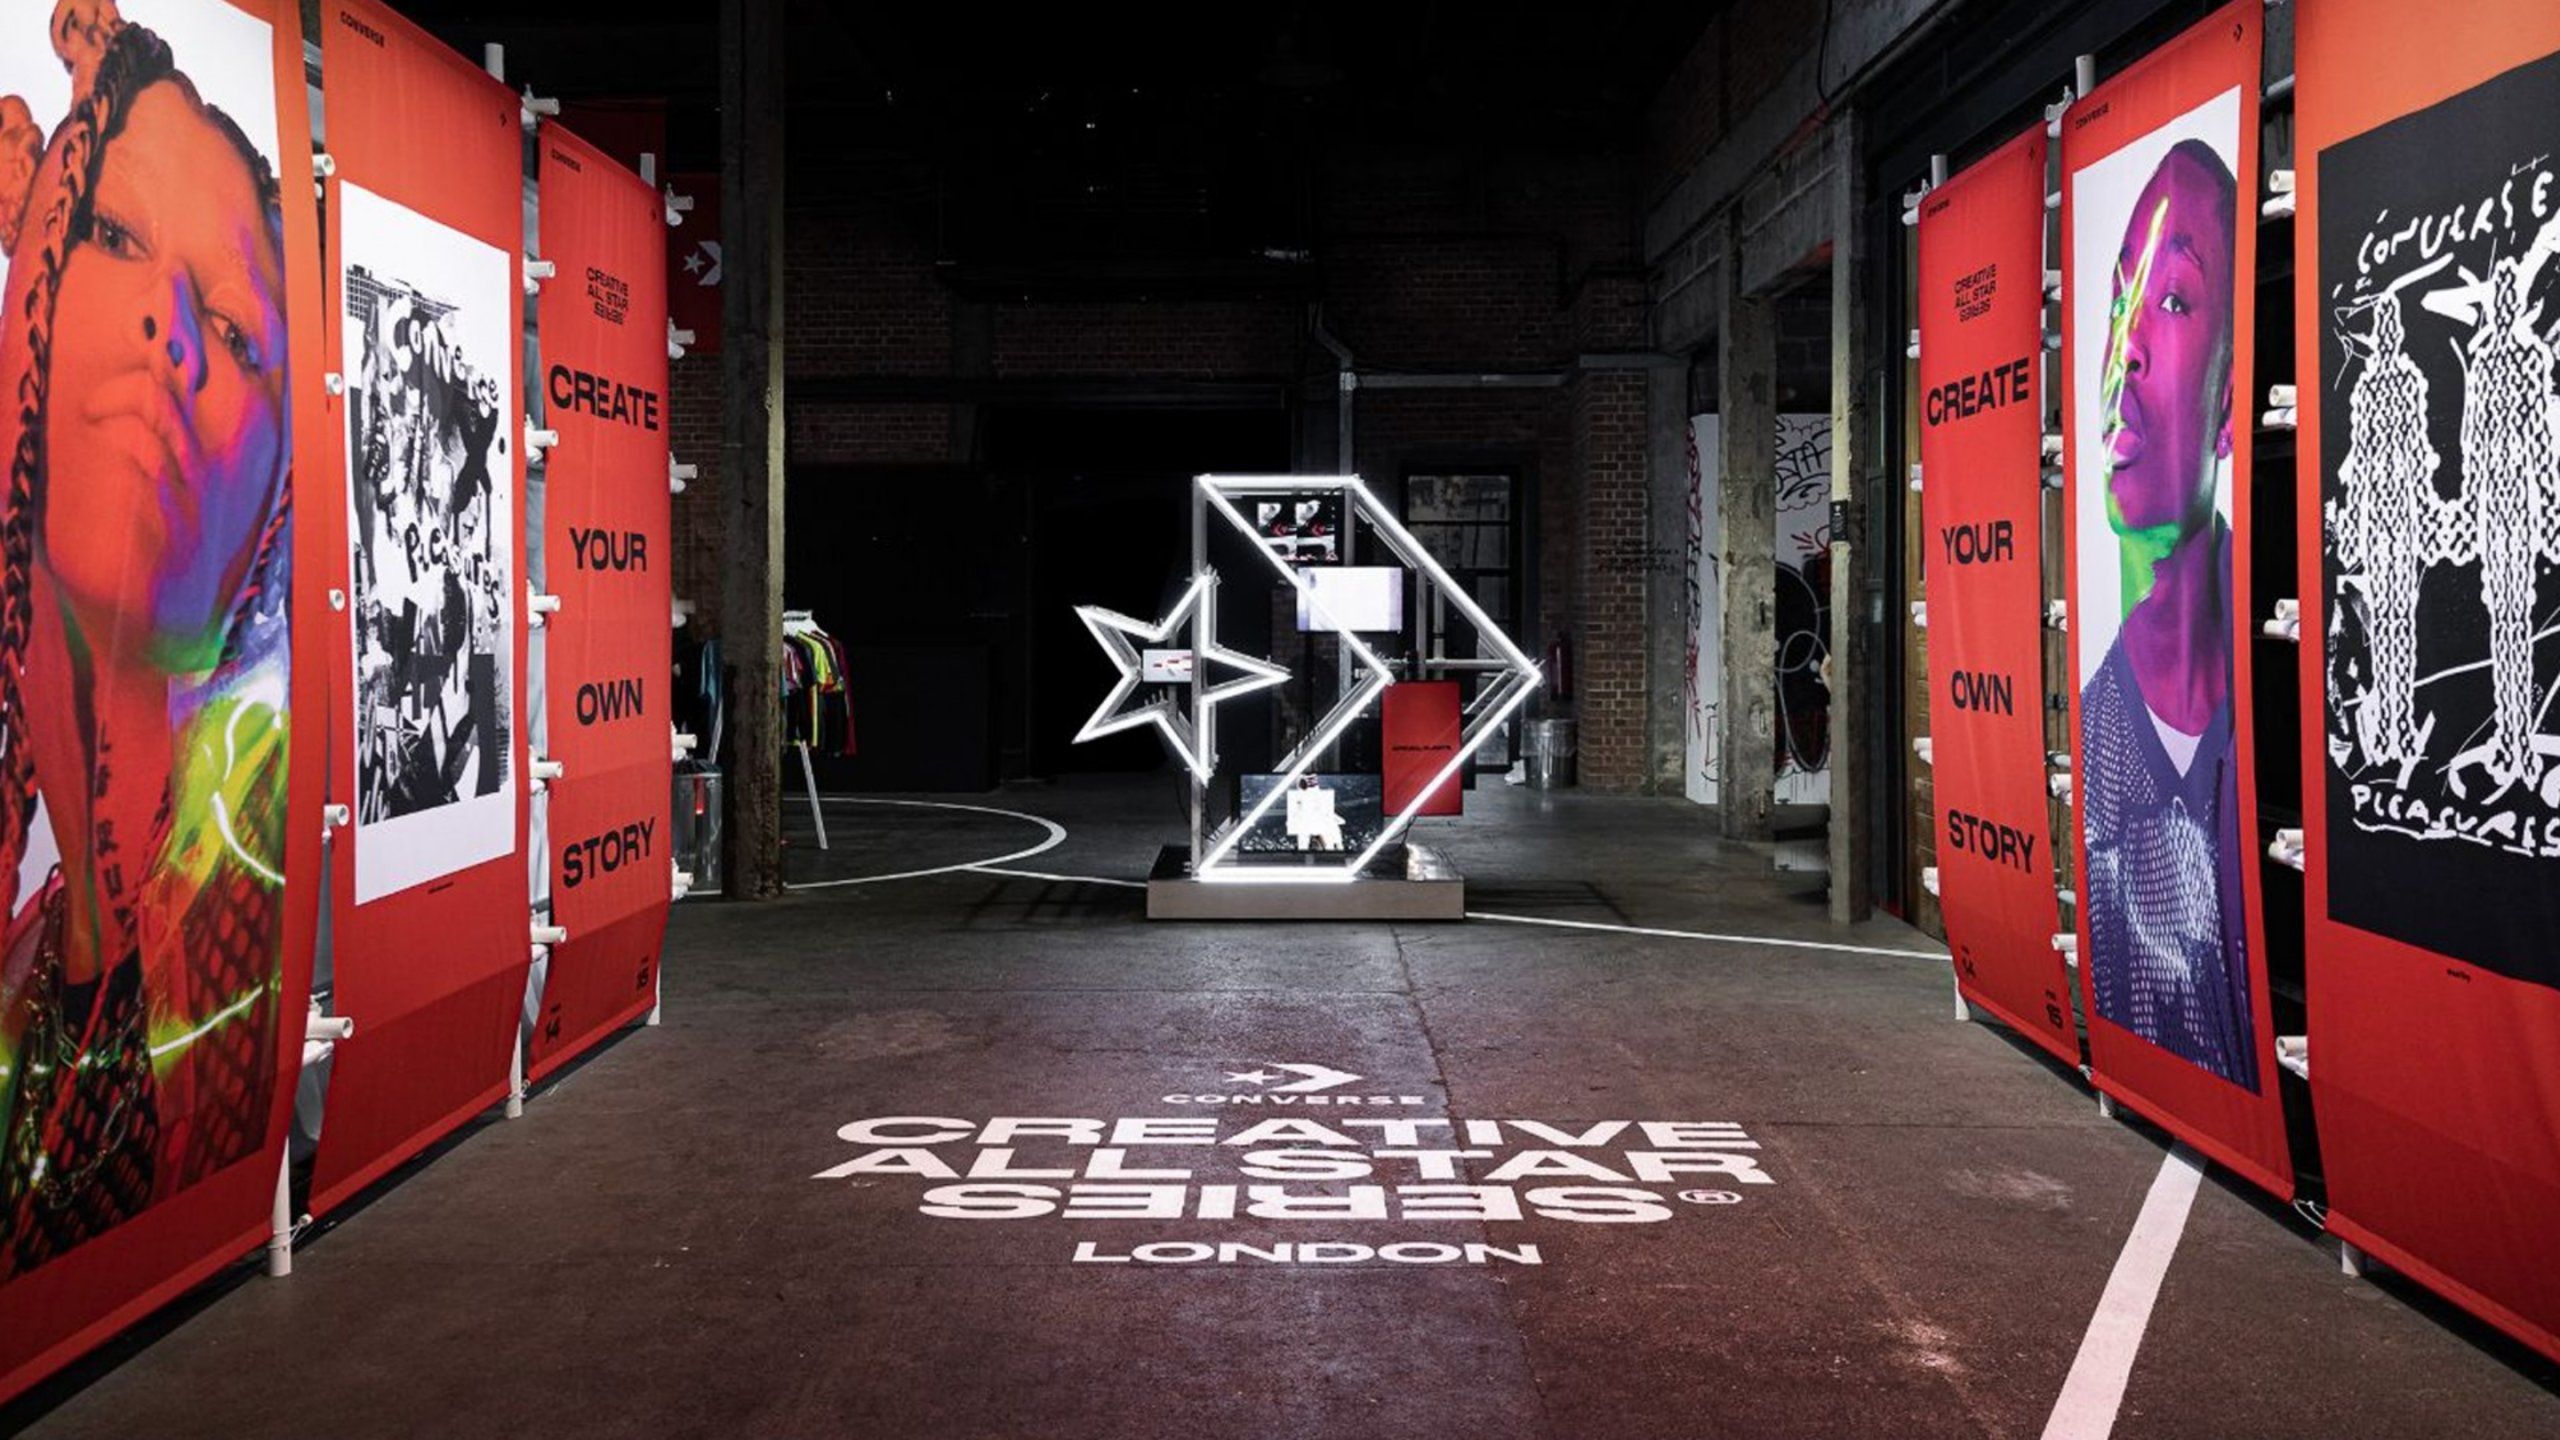 Converse Event space with Banners creating walls, Creative All Star Series London printed on floor and large Converse logo neon sign in middle of floor